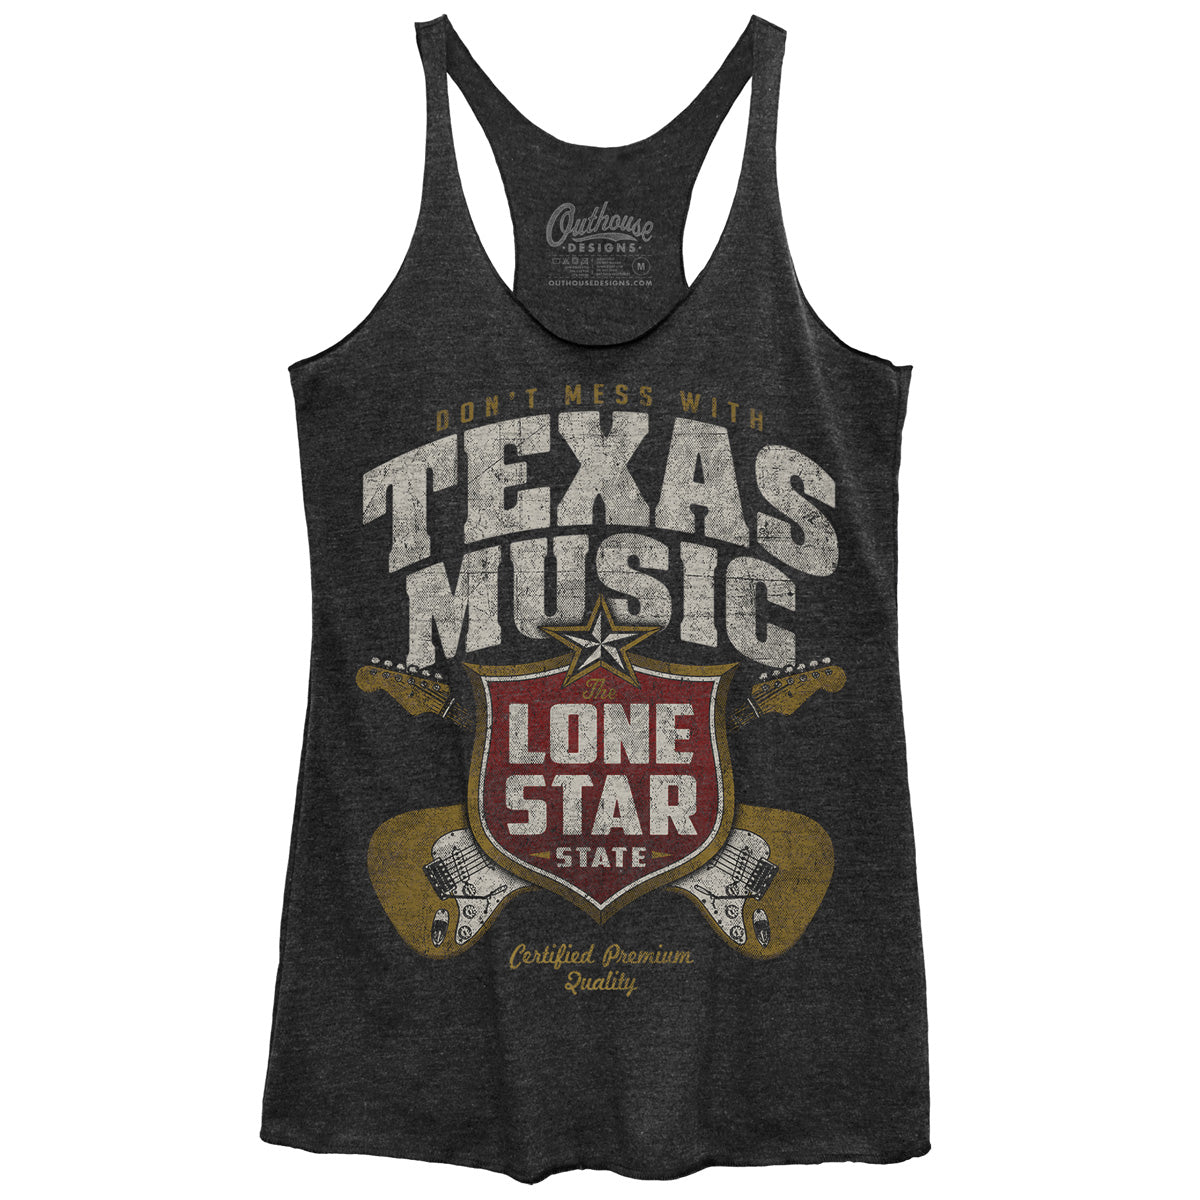 Don't Mess With Texas Music Women's Tank